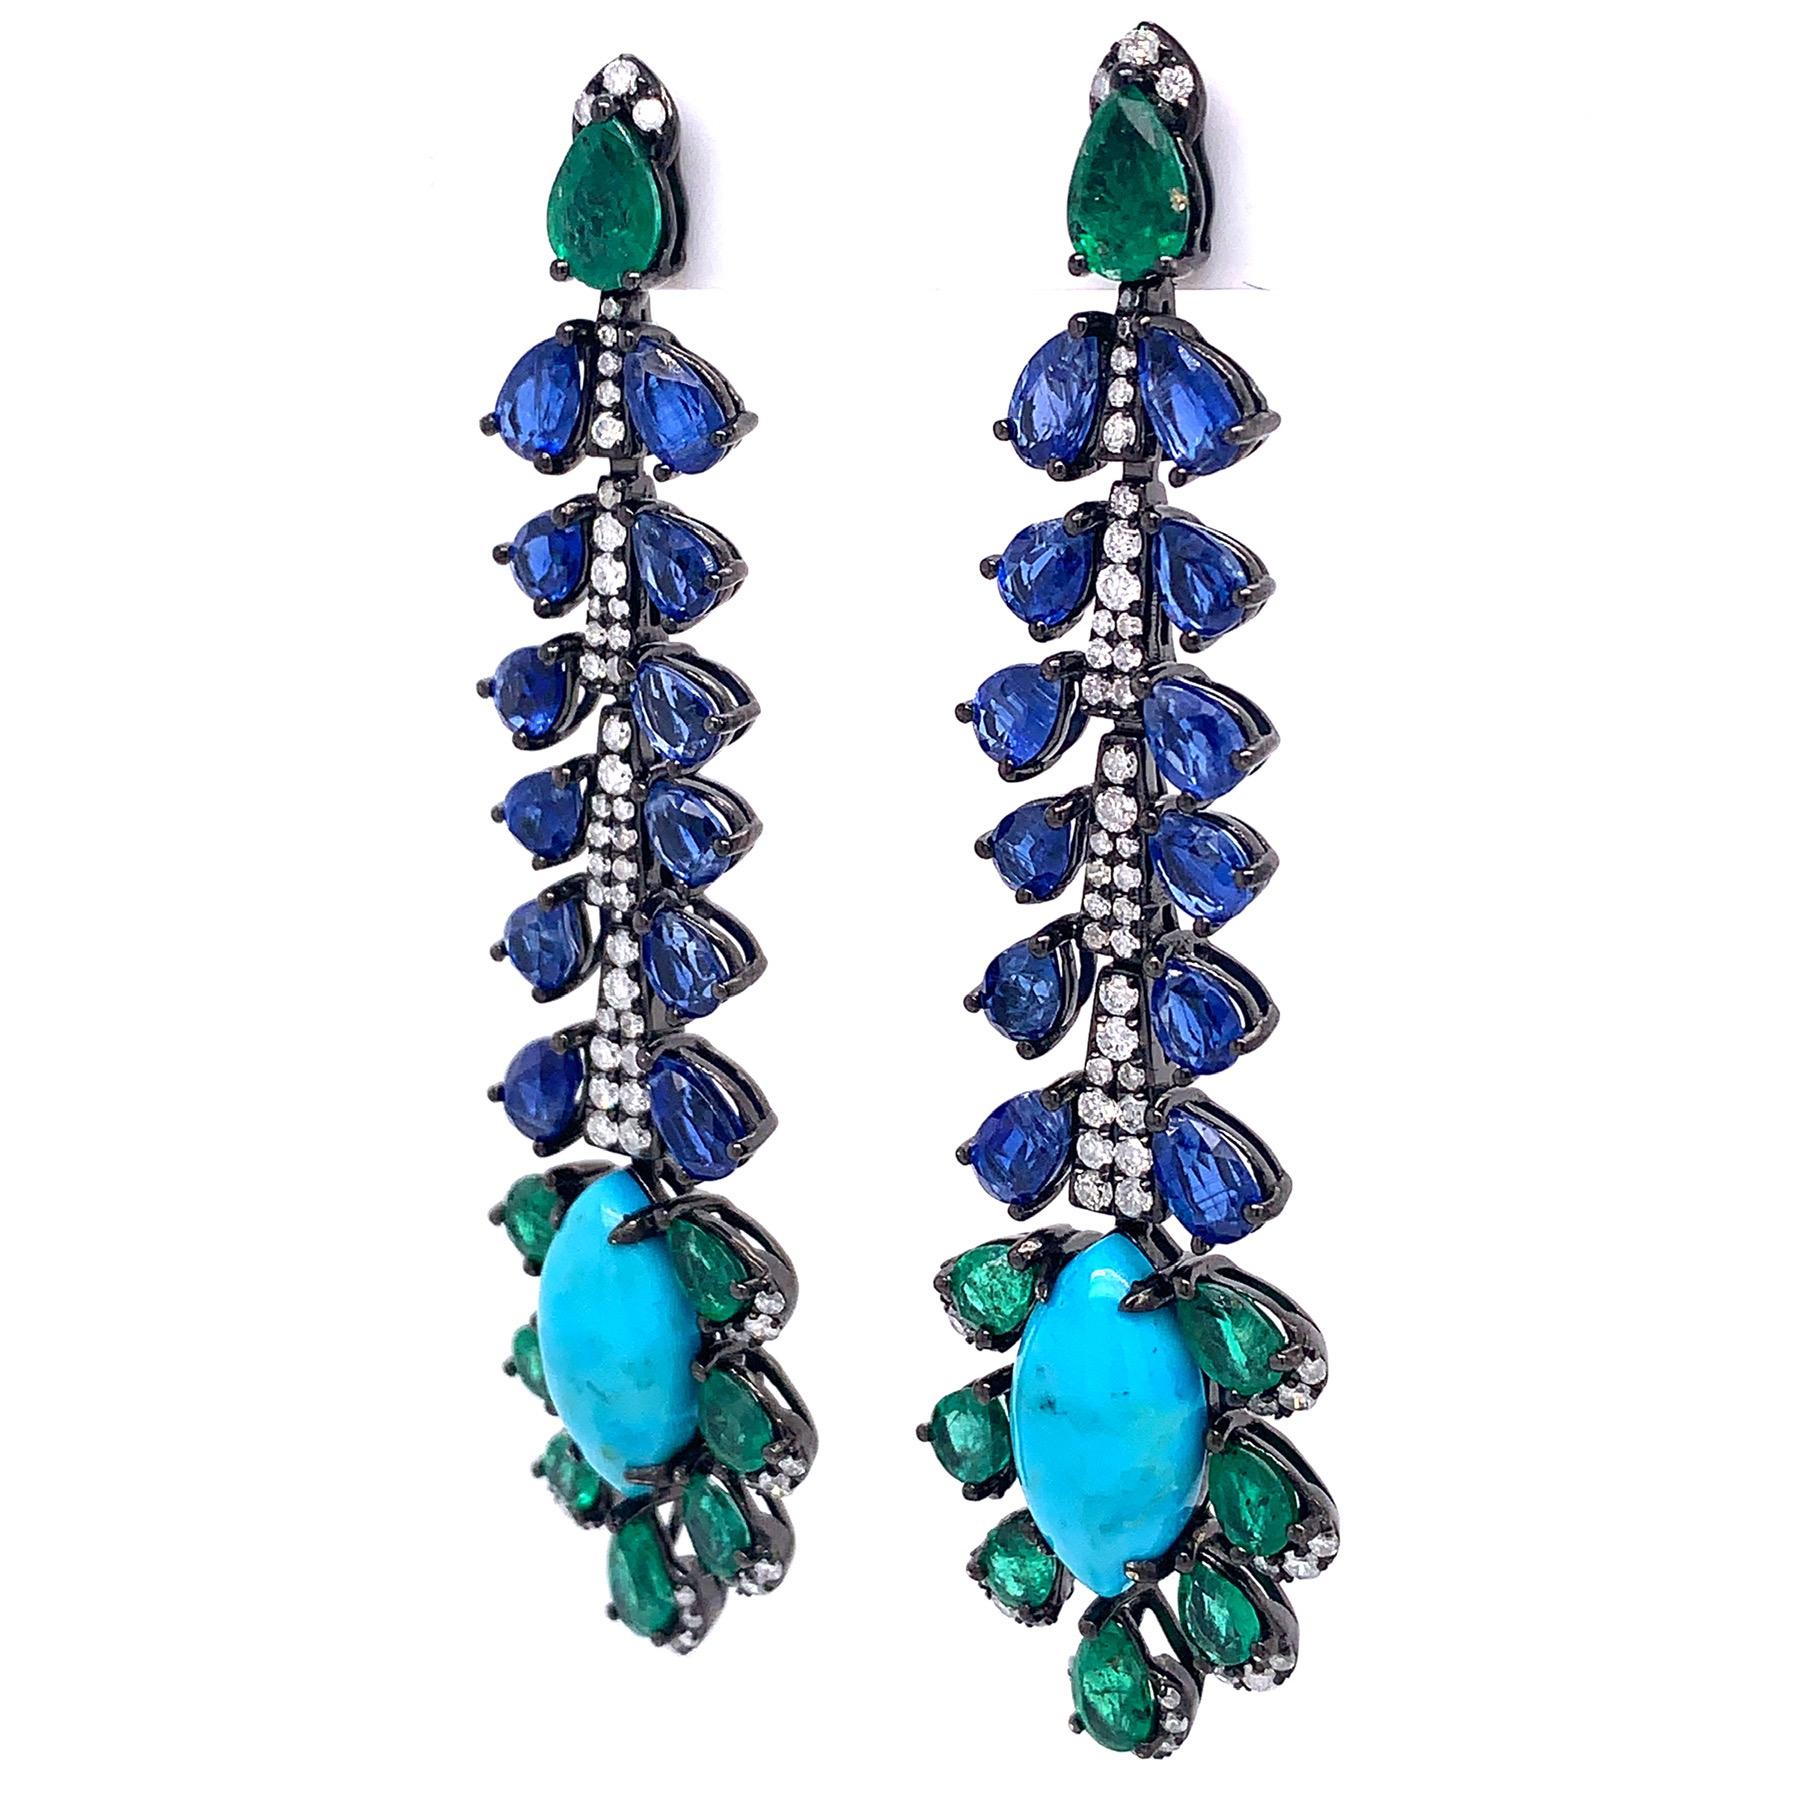 Earthy Hues Collection

Turquoise, Kyanite, Emerald and Diamond leaf chandelier earrings set in 18K black rhodium gold.

Turquoise: 4ct total weight.
Emerald: 2.97ct total weight.
Kyanite: 5.8ct total weight.
Diamonds: 0.87ct total weight.
All